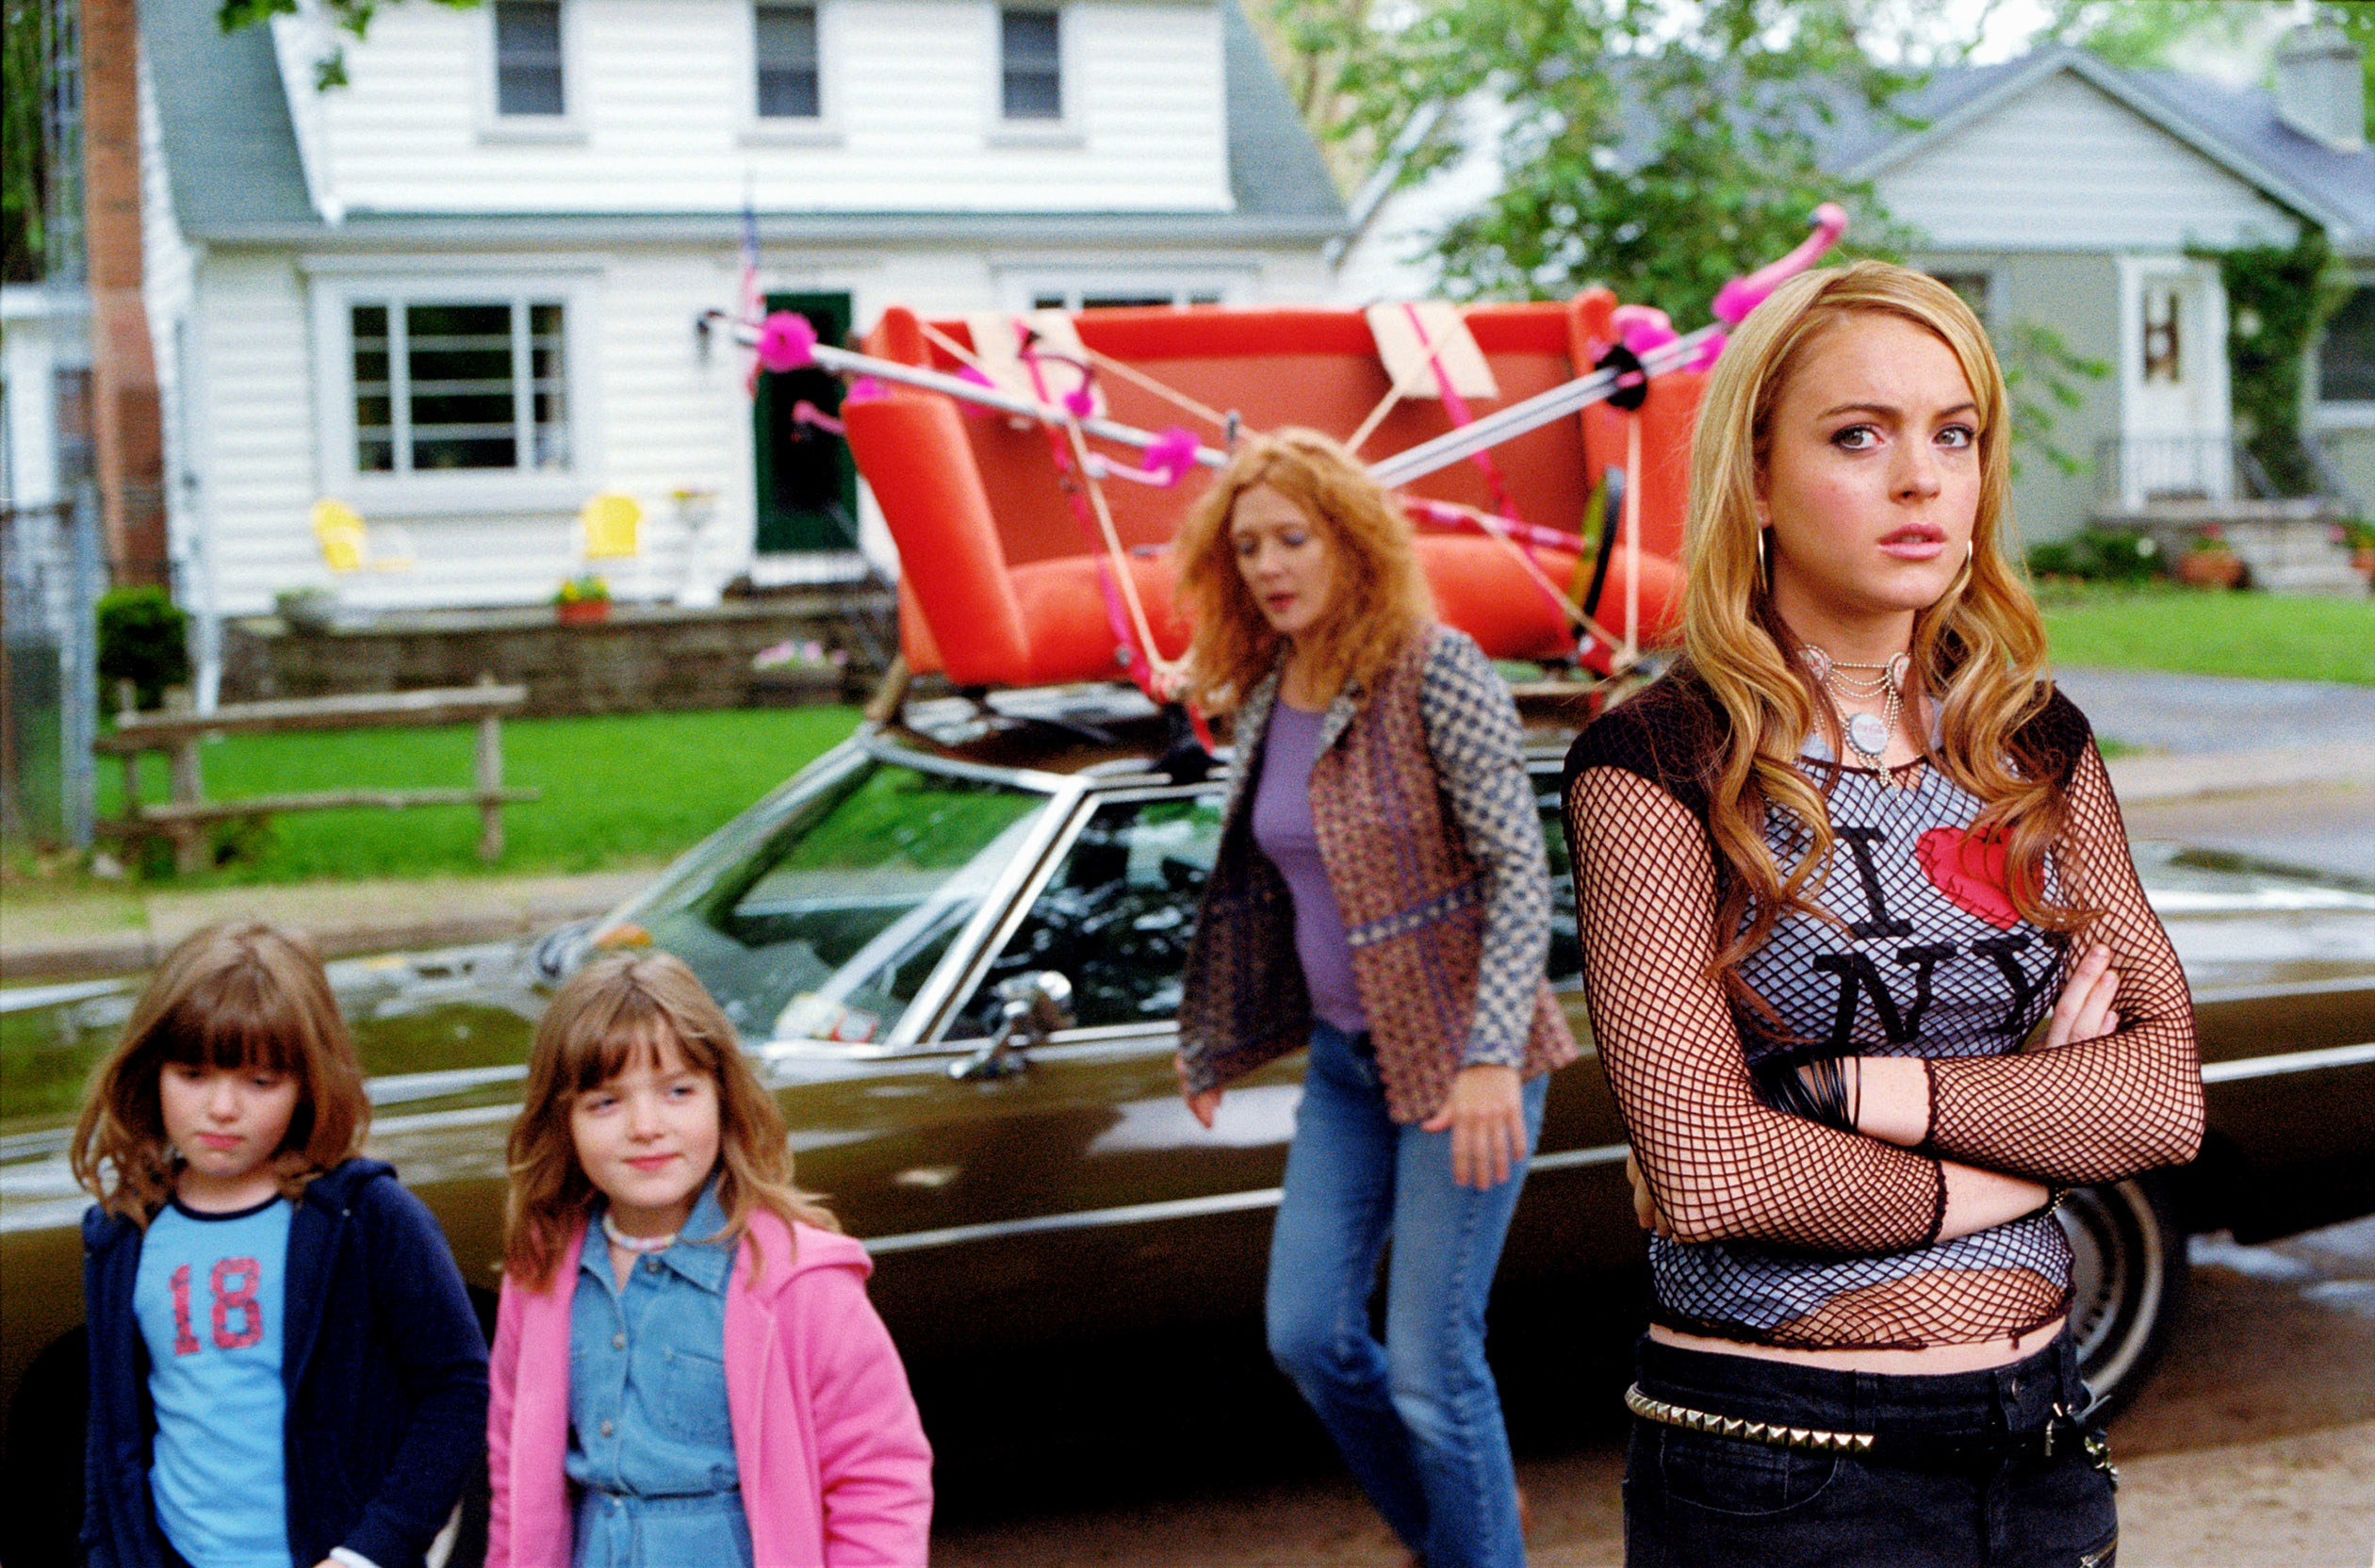 Maggie Oskam, Rachael Oskam, Glenne Headly and Lindsay Lohan in Confessions of a Teenage Drama Queen